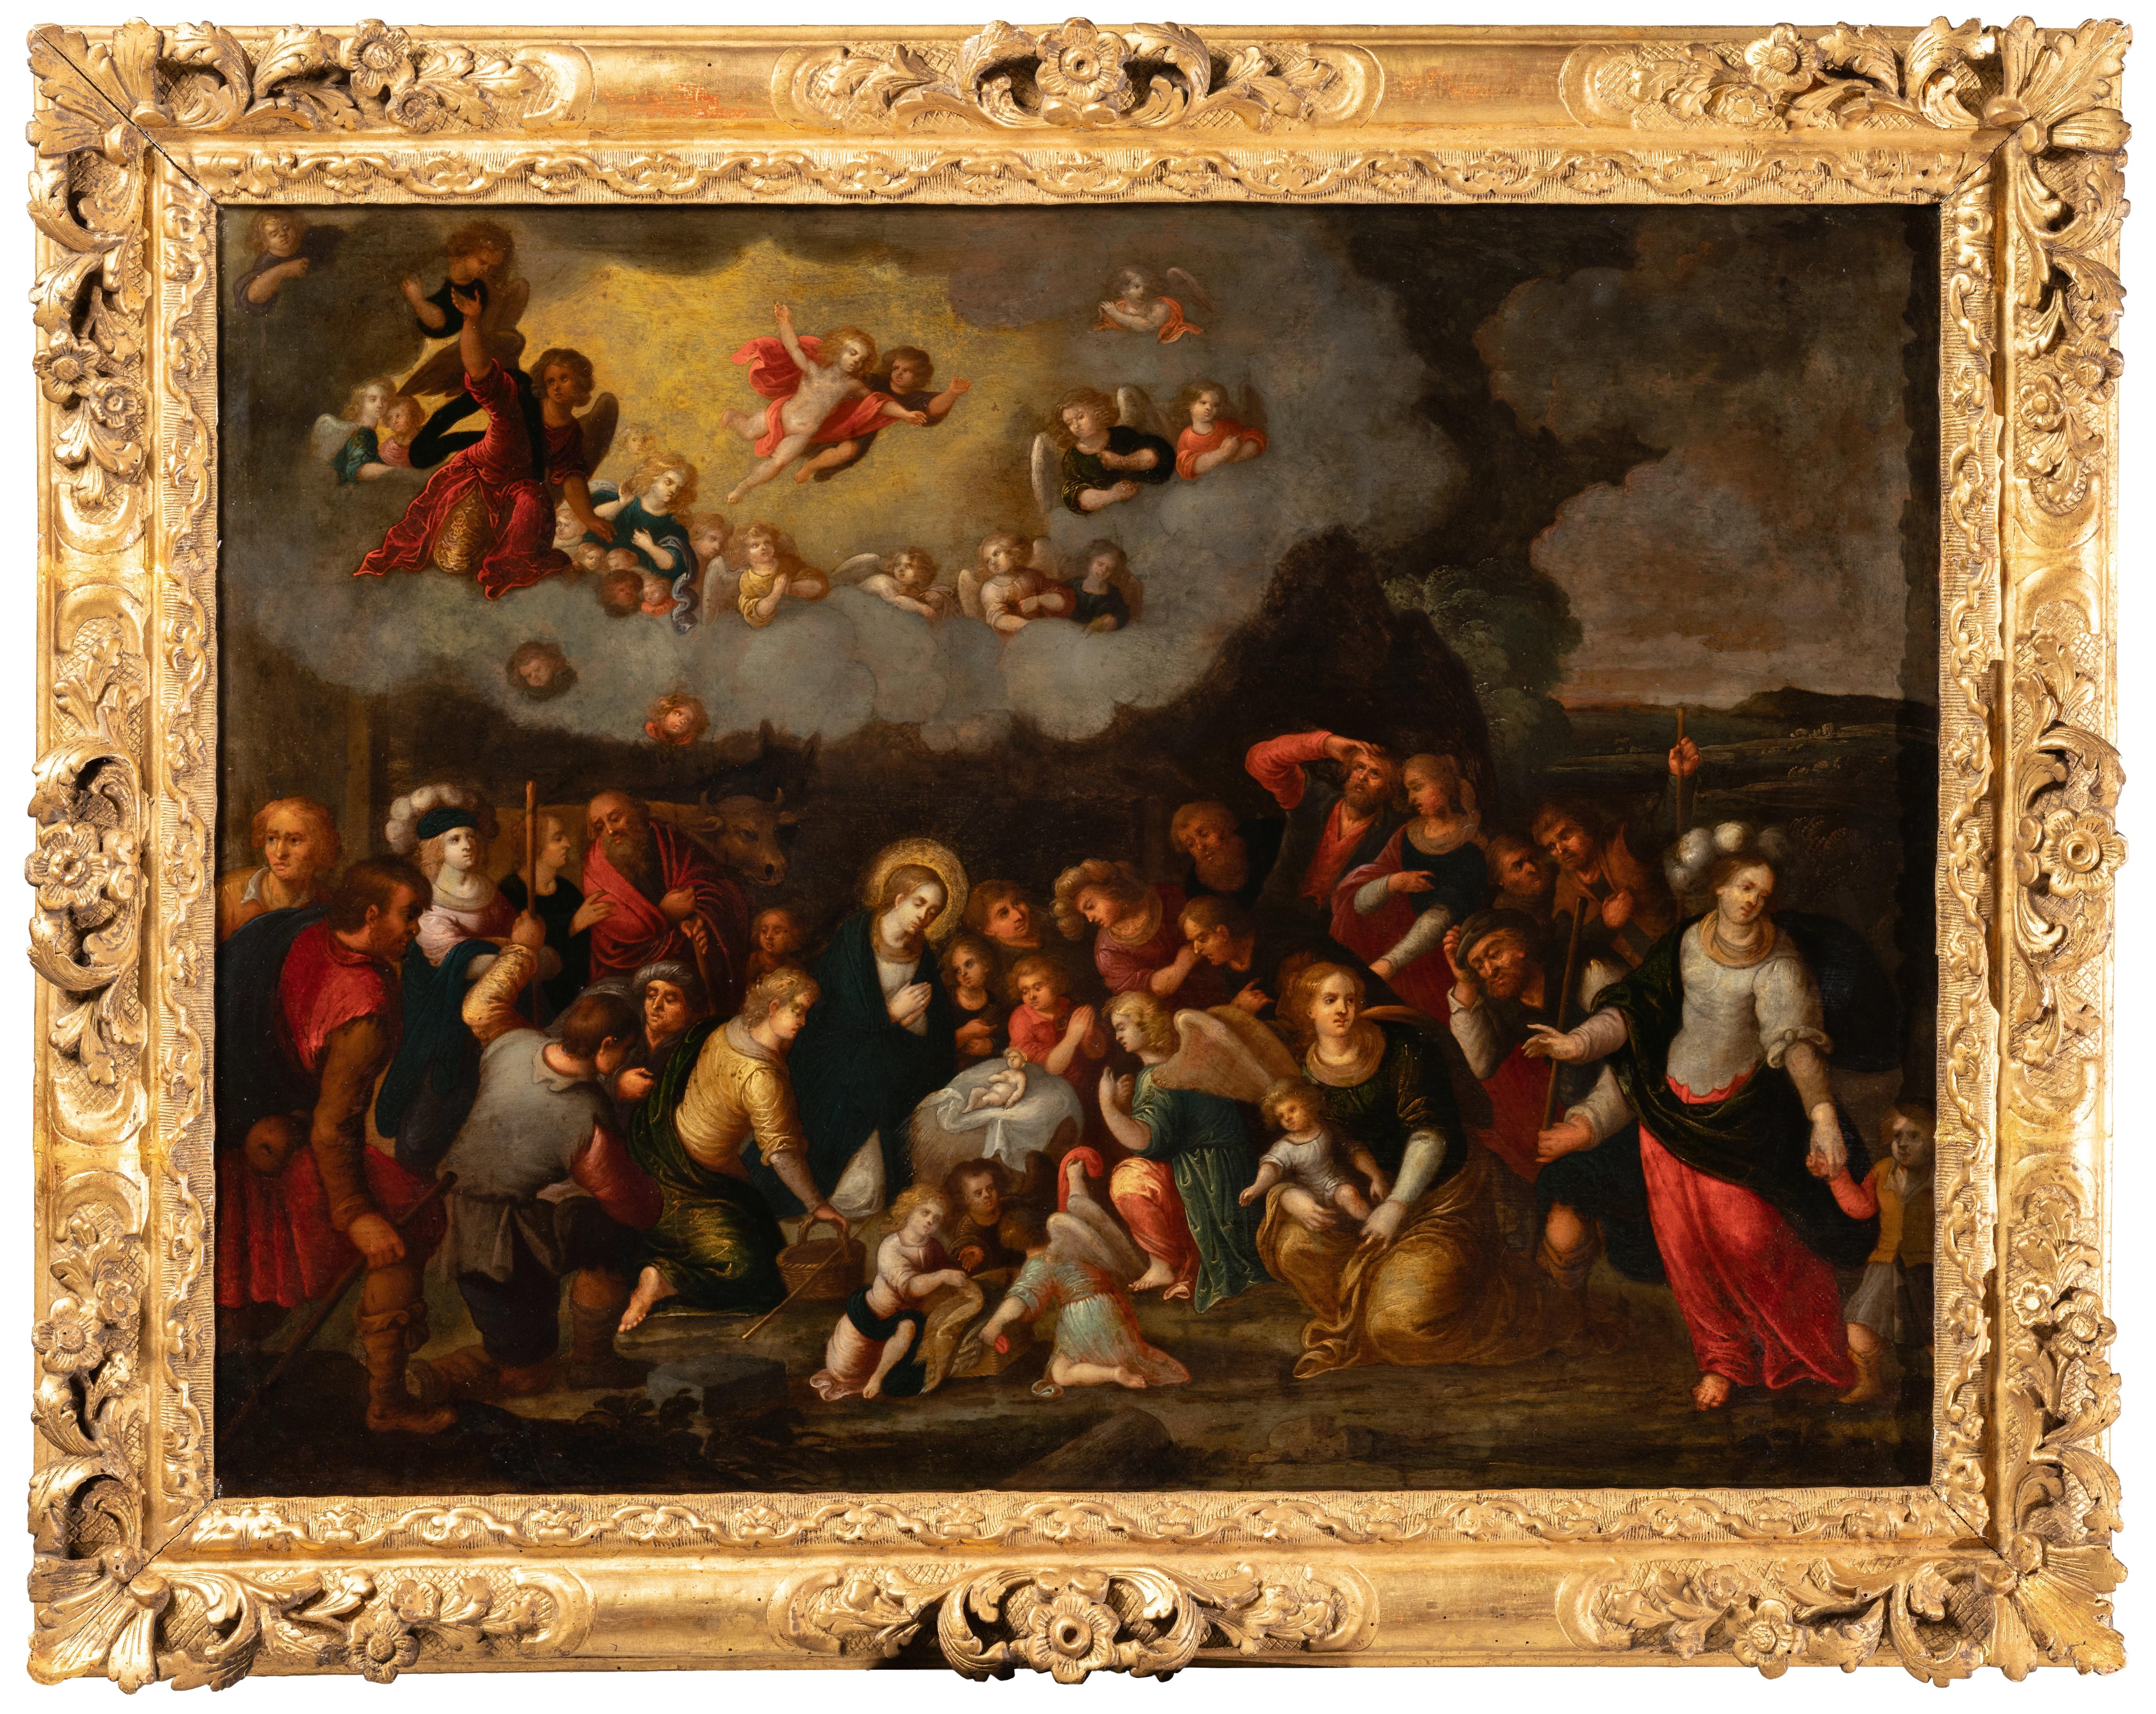 Adoration of the Shepherds
Attributed to Louis de Caullery (1580-1622)
17th century Antwerp School, circa 1620
Oil on copper: h. 54 cm (21.26 in.), w. 72 cm (28.35 in)
A 17th century Louis XIV period giltwood frame carved with flowers, foliage and